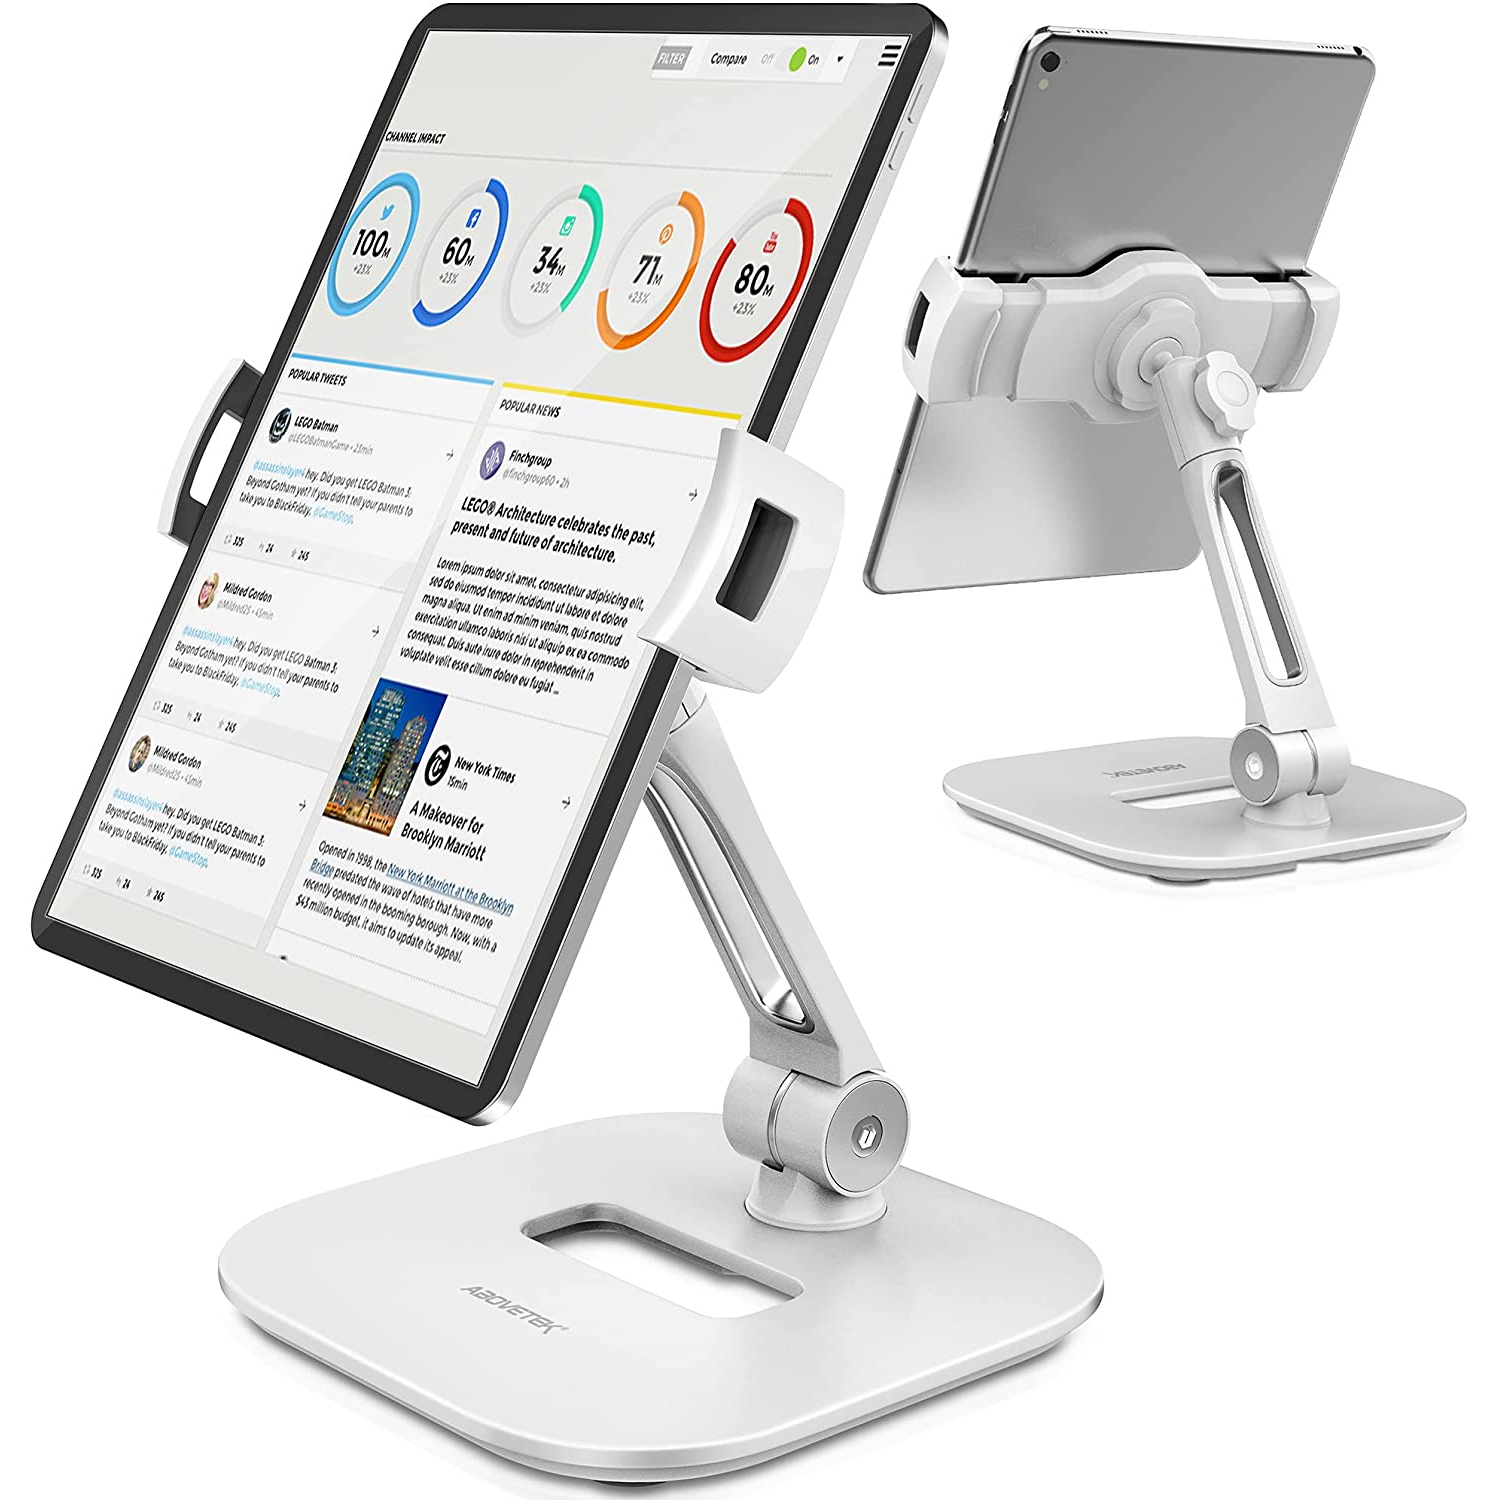 Stylish Aluminum Tablet Stand, Cell Phone Stand, Folding 360° Swivel iPad iPhone Desk Mount Holder fits 4-11”